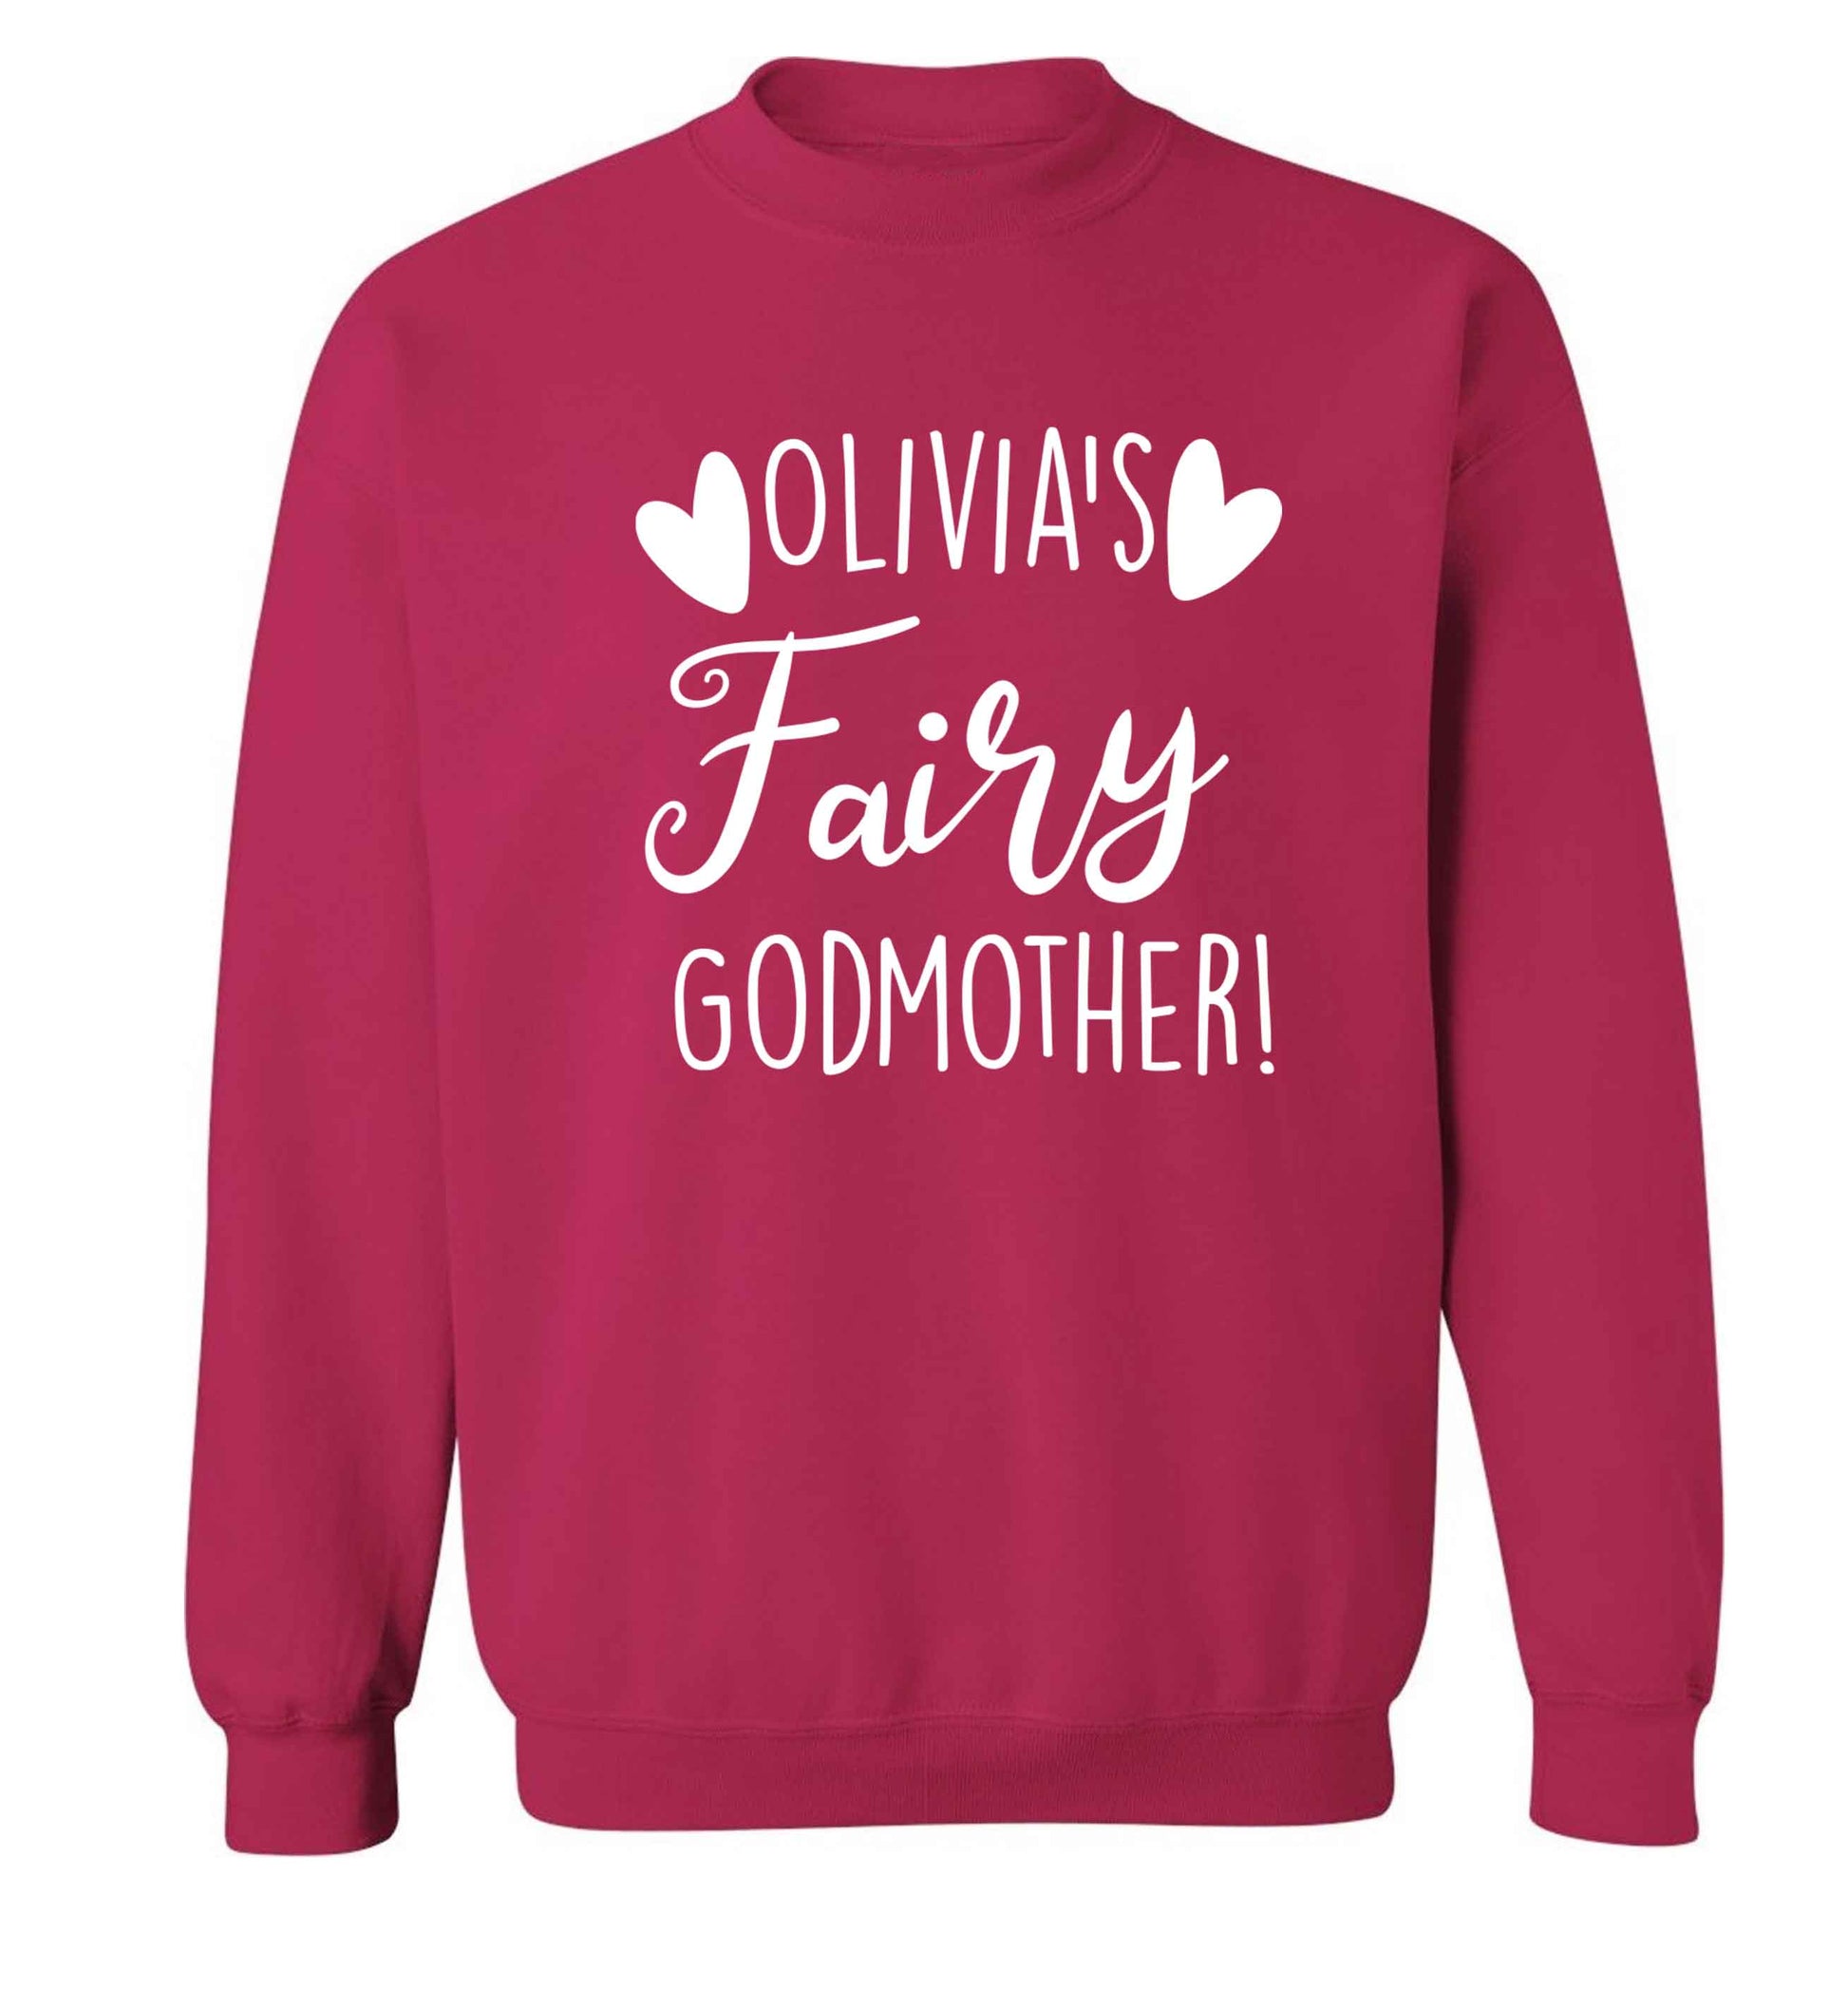 Personalised fairy Godmother adult's unisex pink sweater 2XL